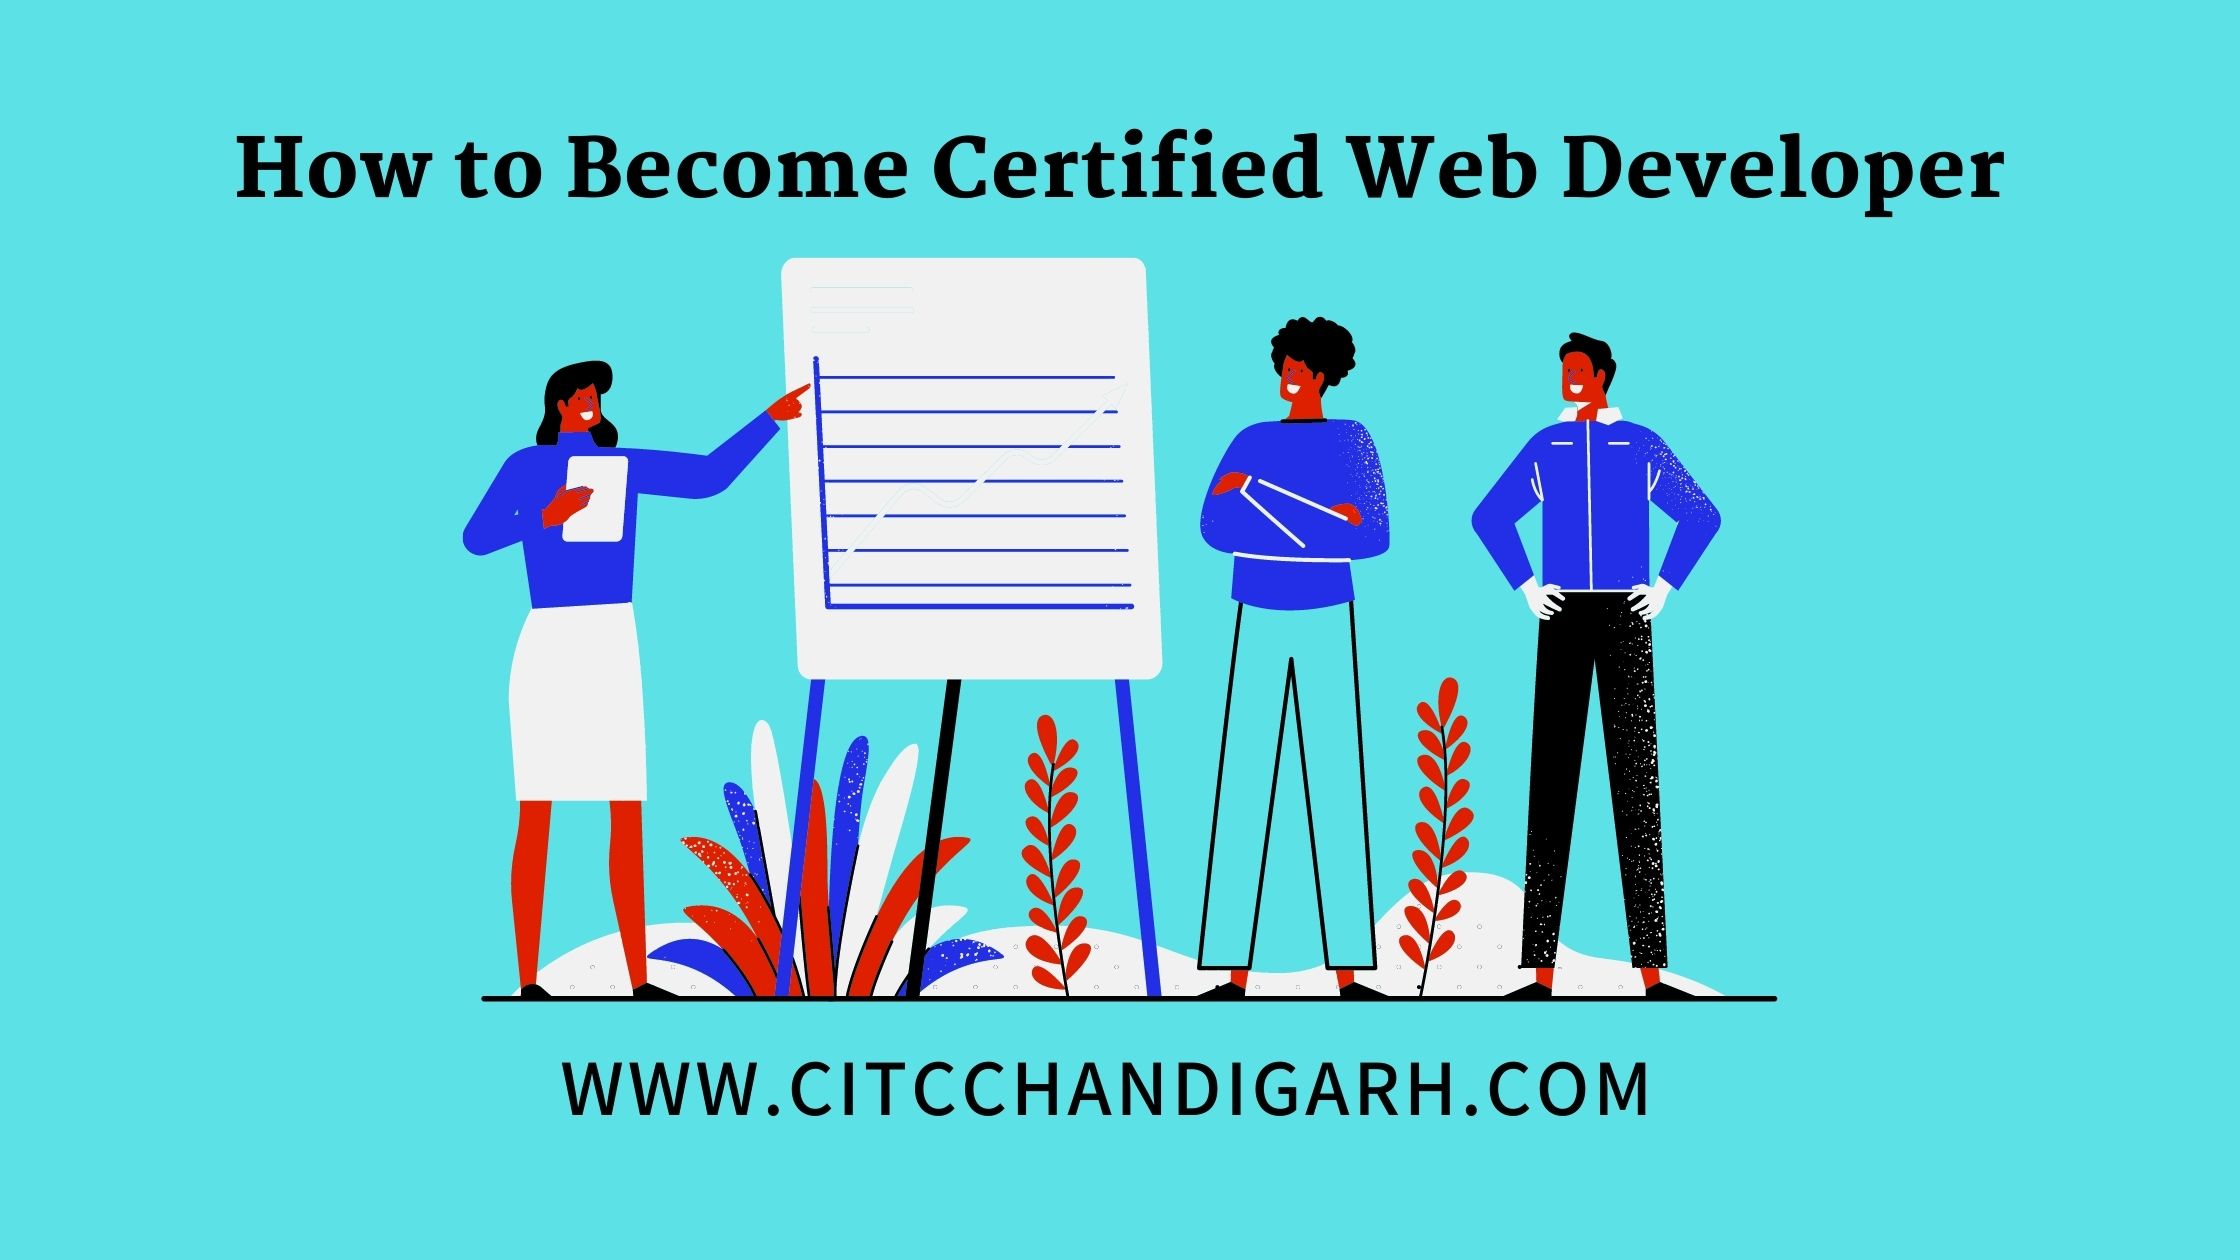 How to Become Certified Web Developer